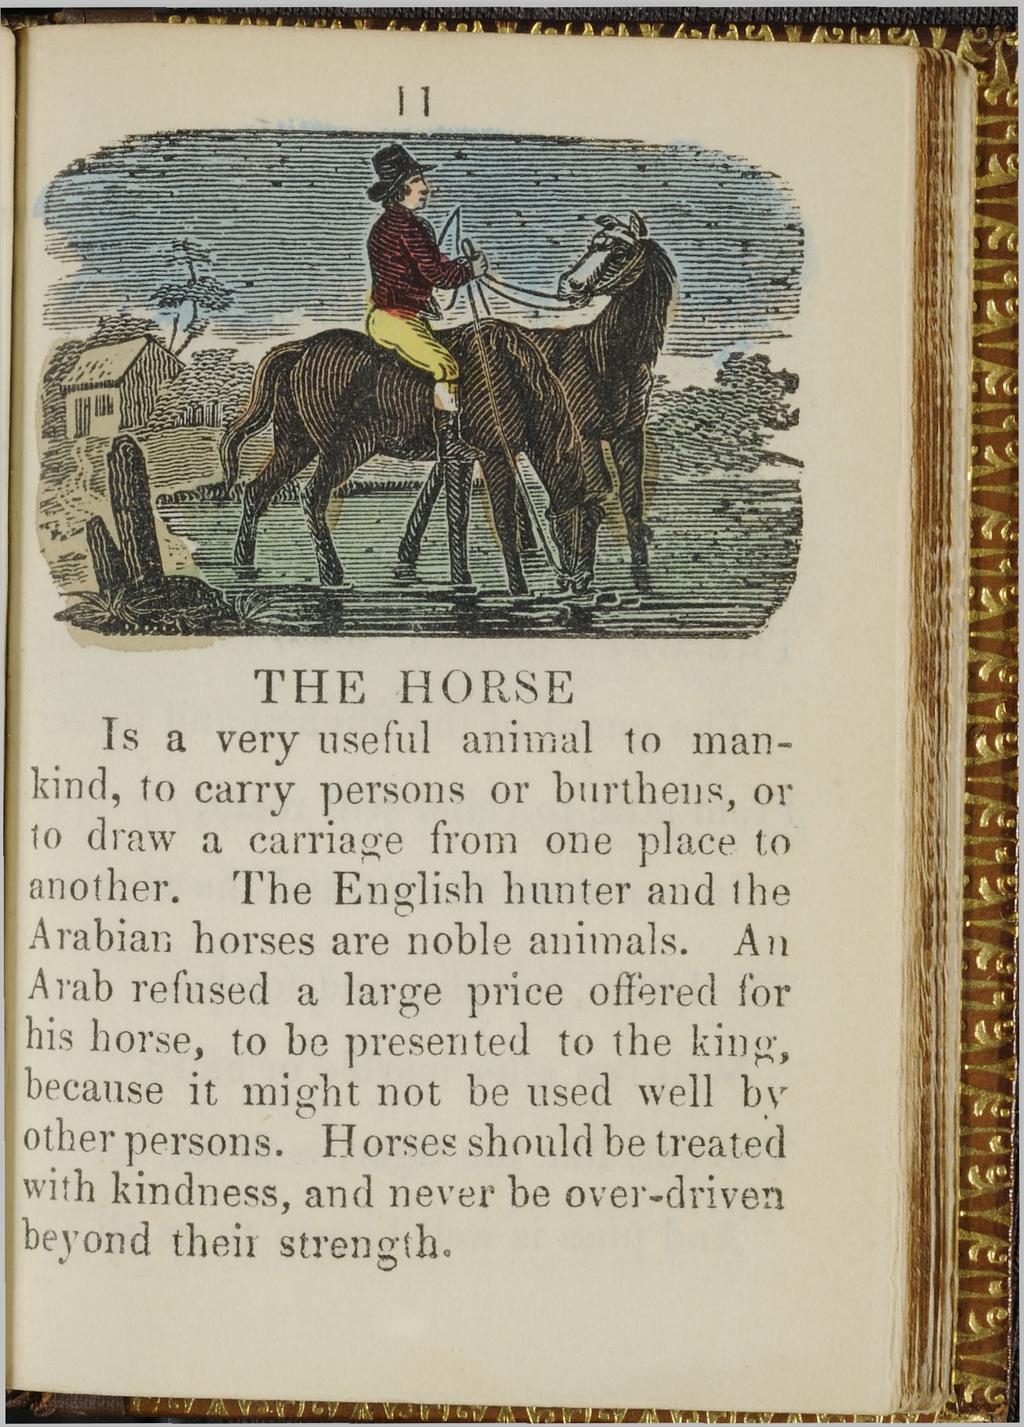 11 T H E H O RSE Is a very useful animal to mankind, to carry persons or burthens, or to draw a carriage from one place to another. The English hunter and the Arabian horses are noble animals.